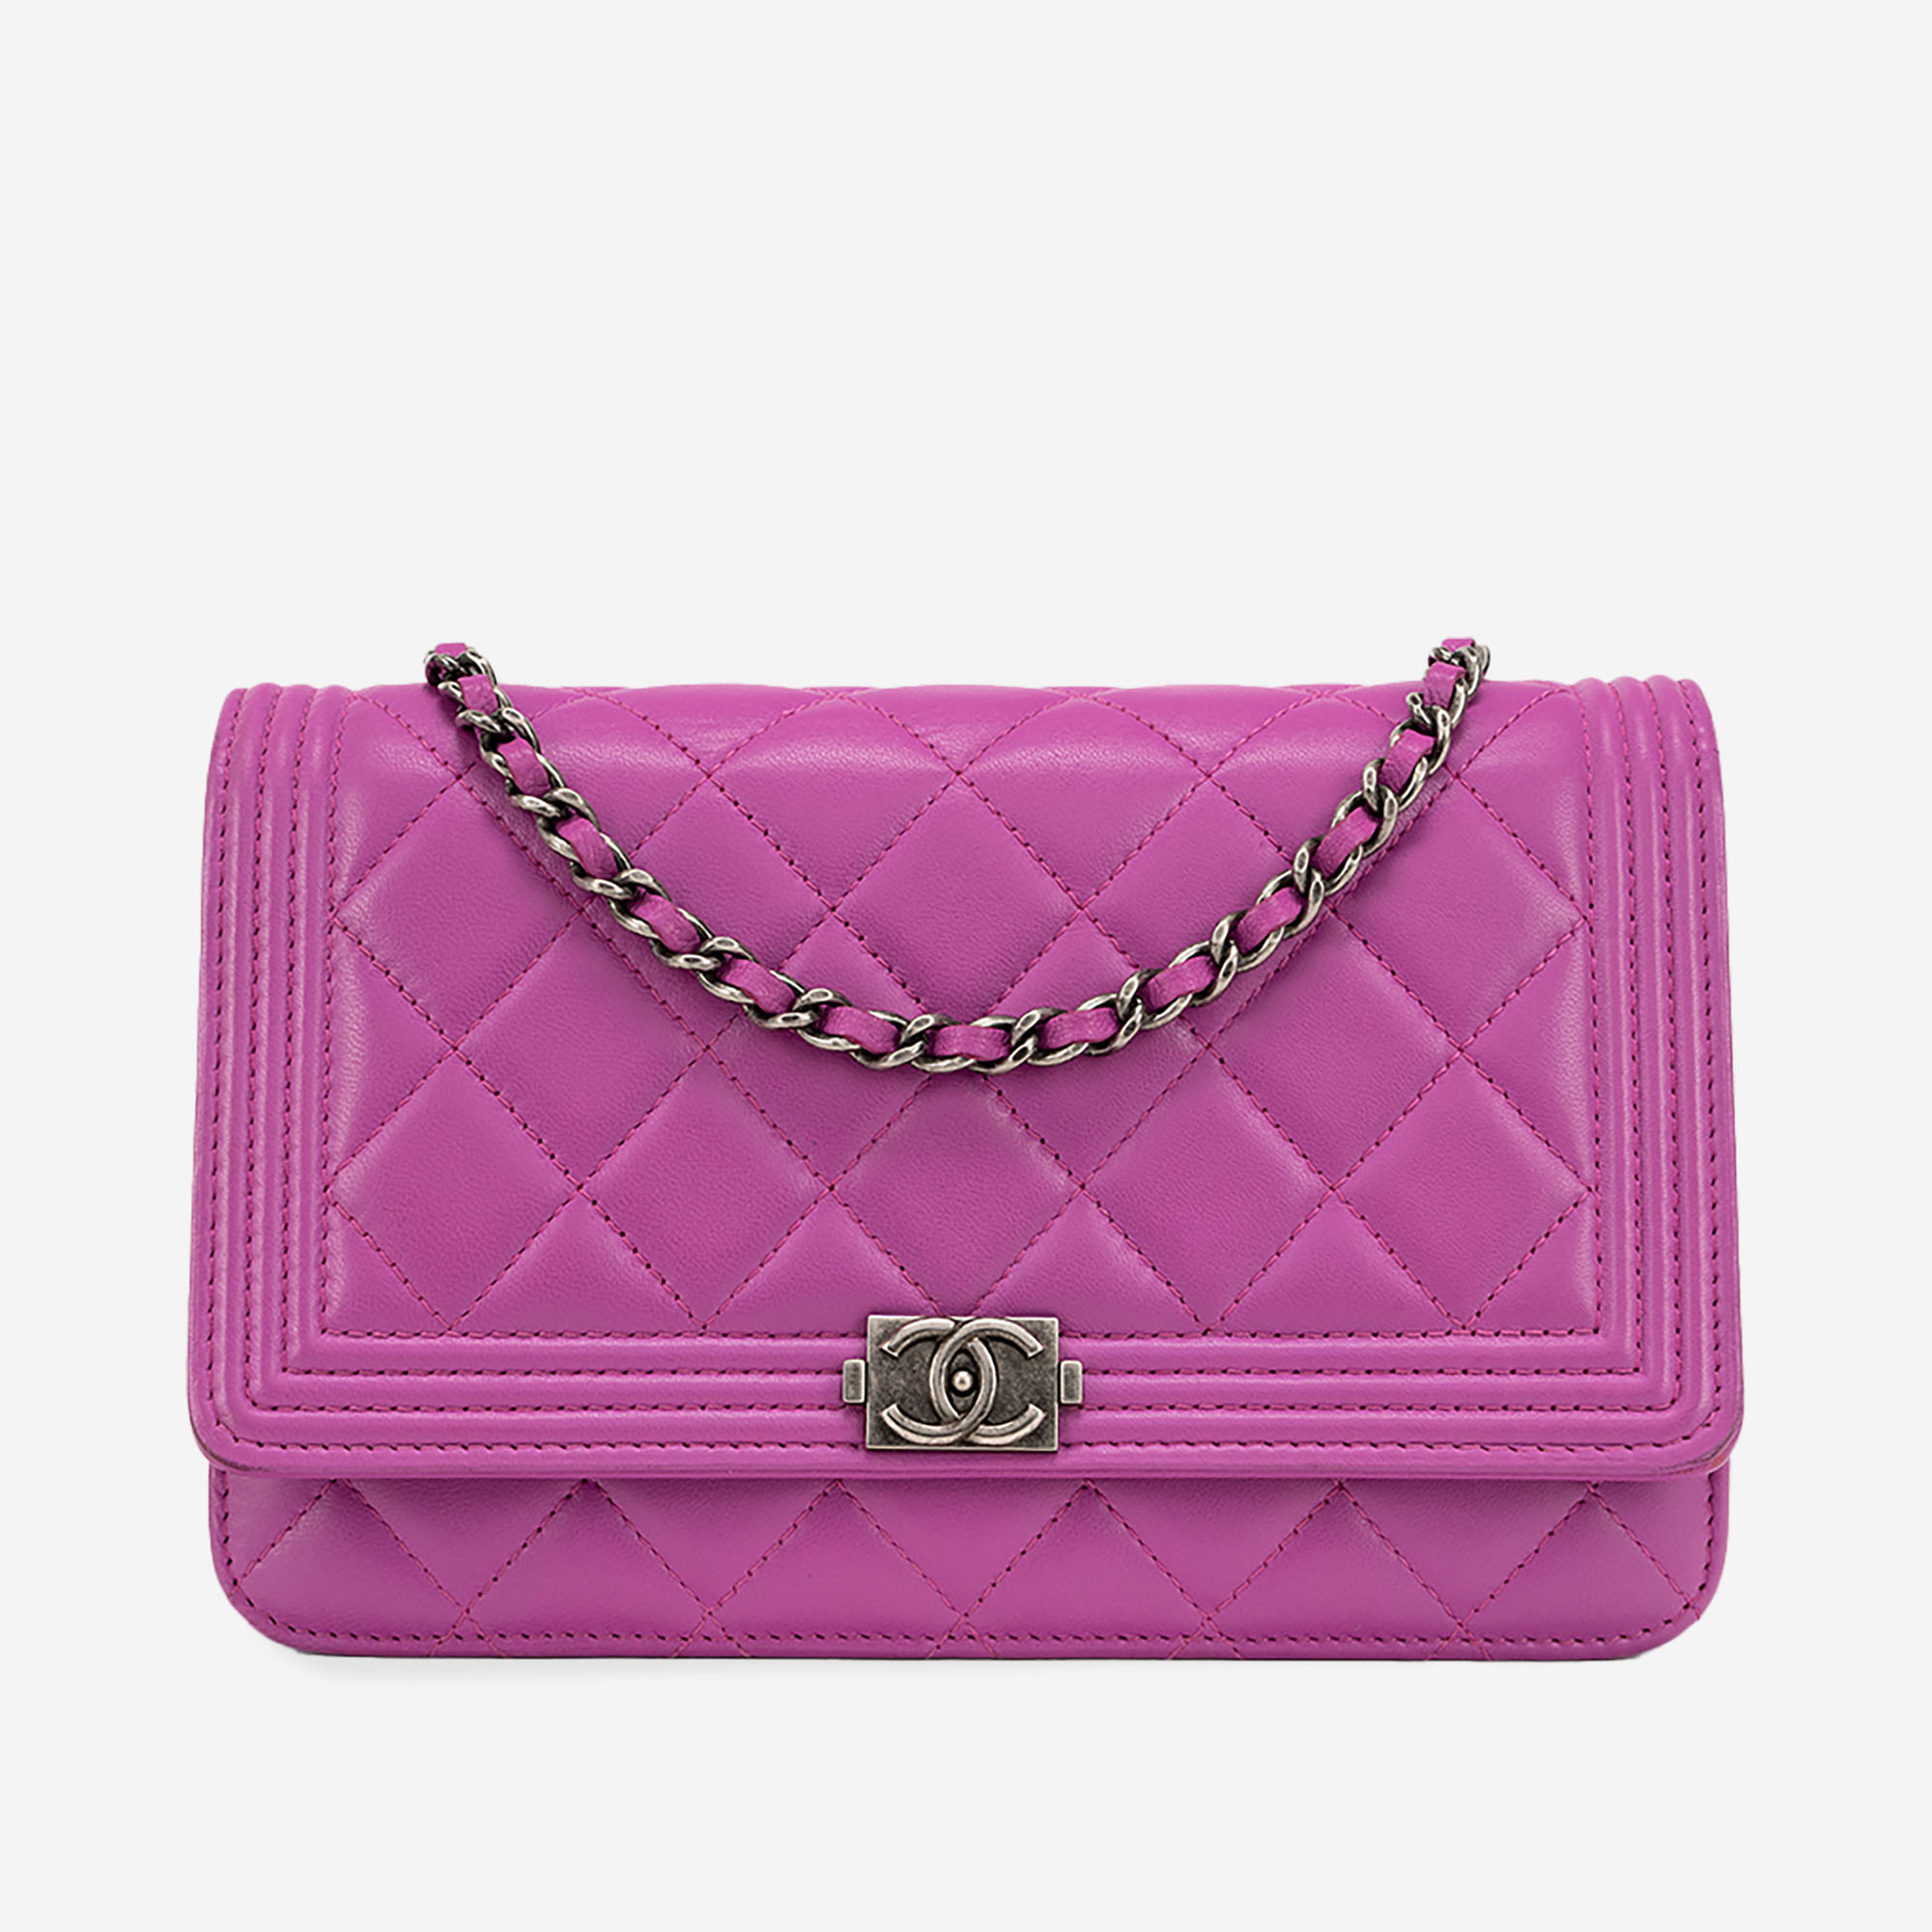 Impossible-to-Find Chanel Handbags Are House of Carver's Stock-in